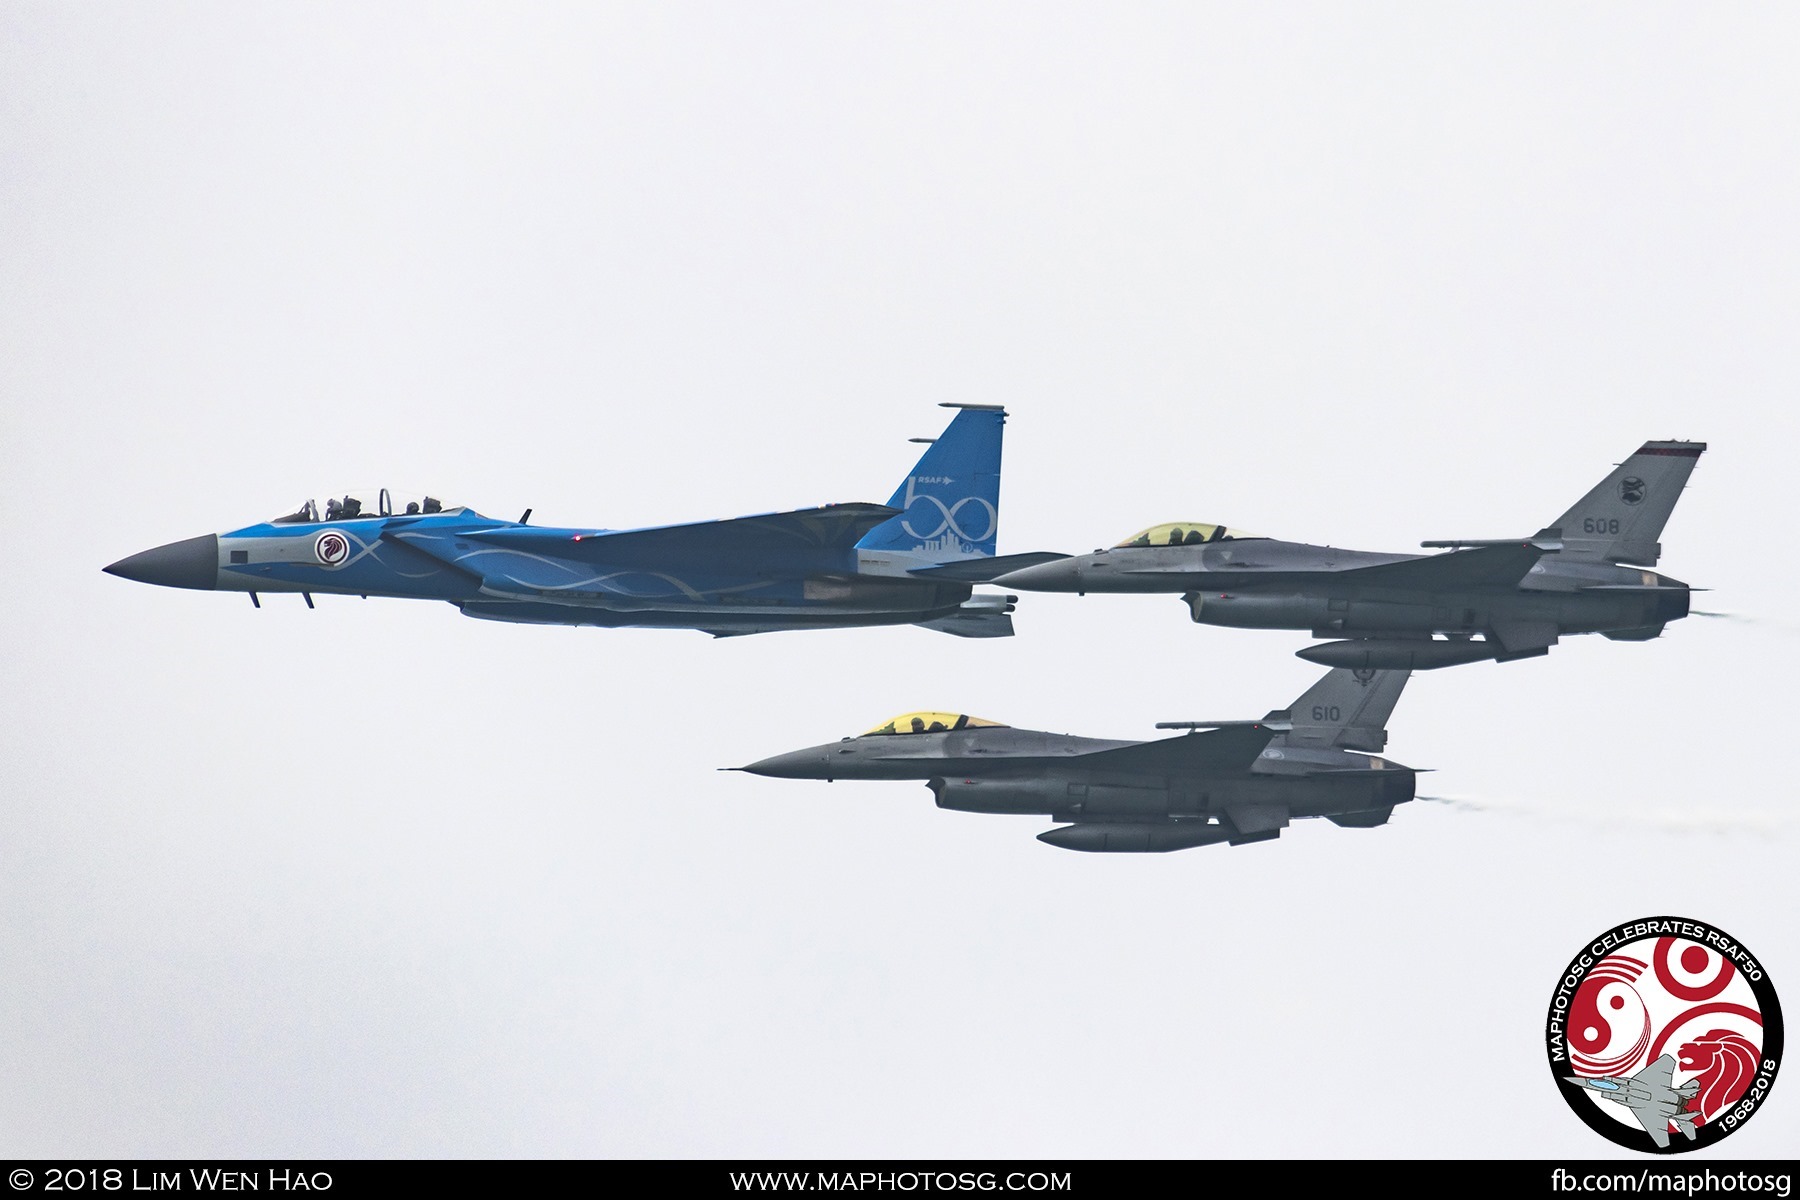 Making entry into show centre from the right, RSAF50 themed F-15SG and two F-16C in Arrowhead Formation.